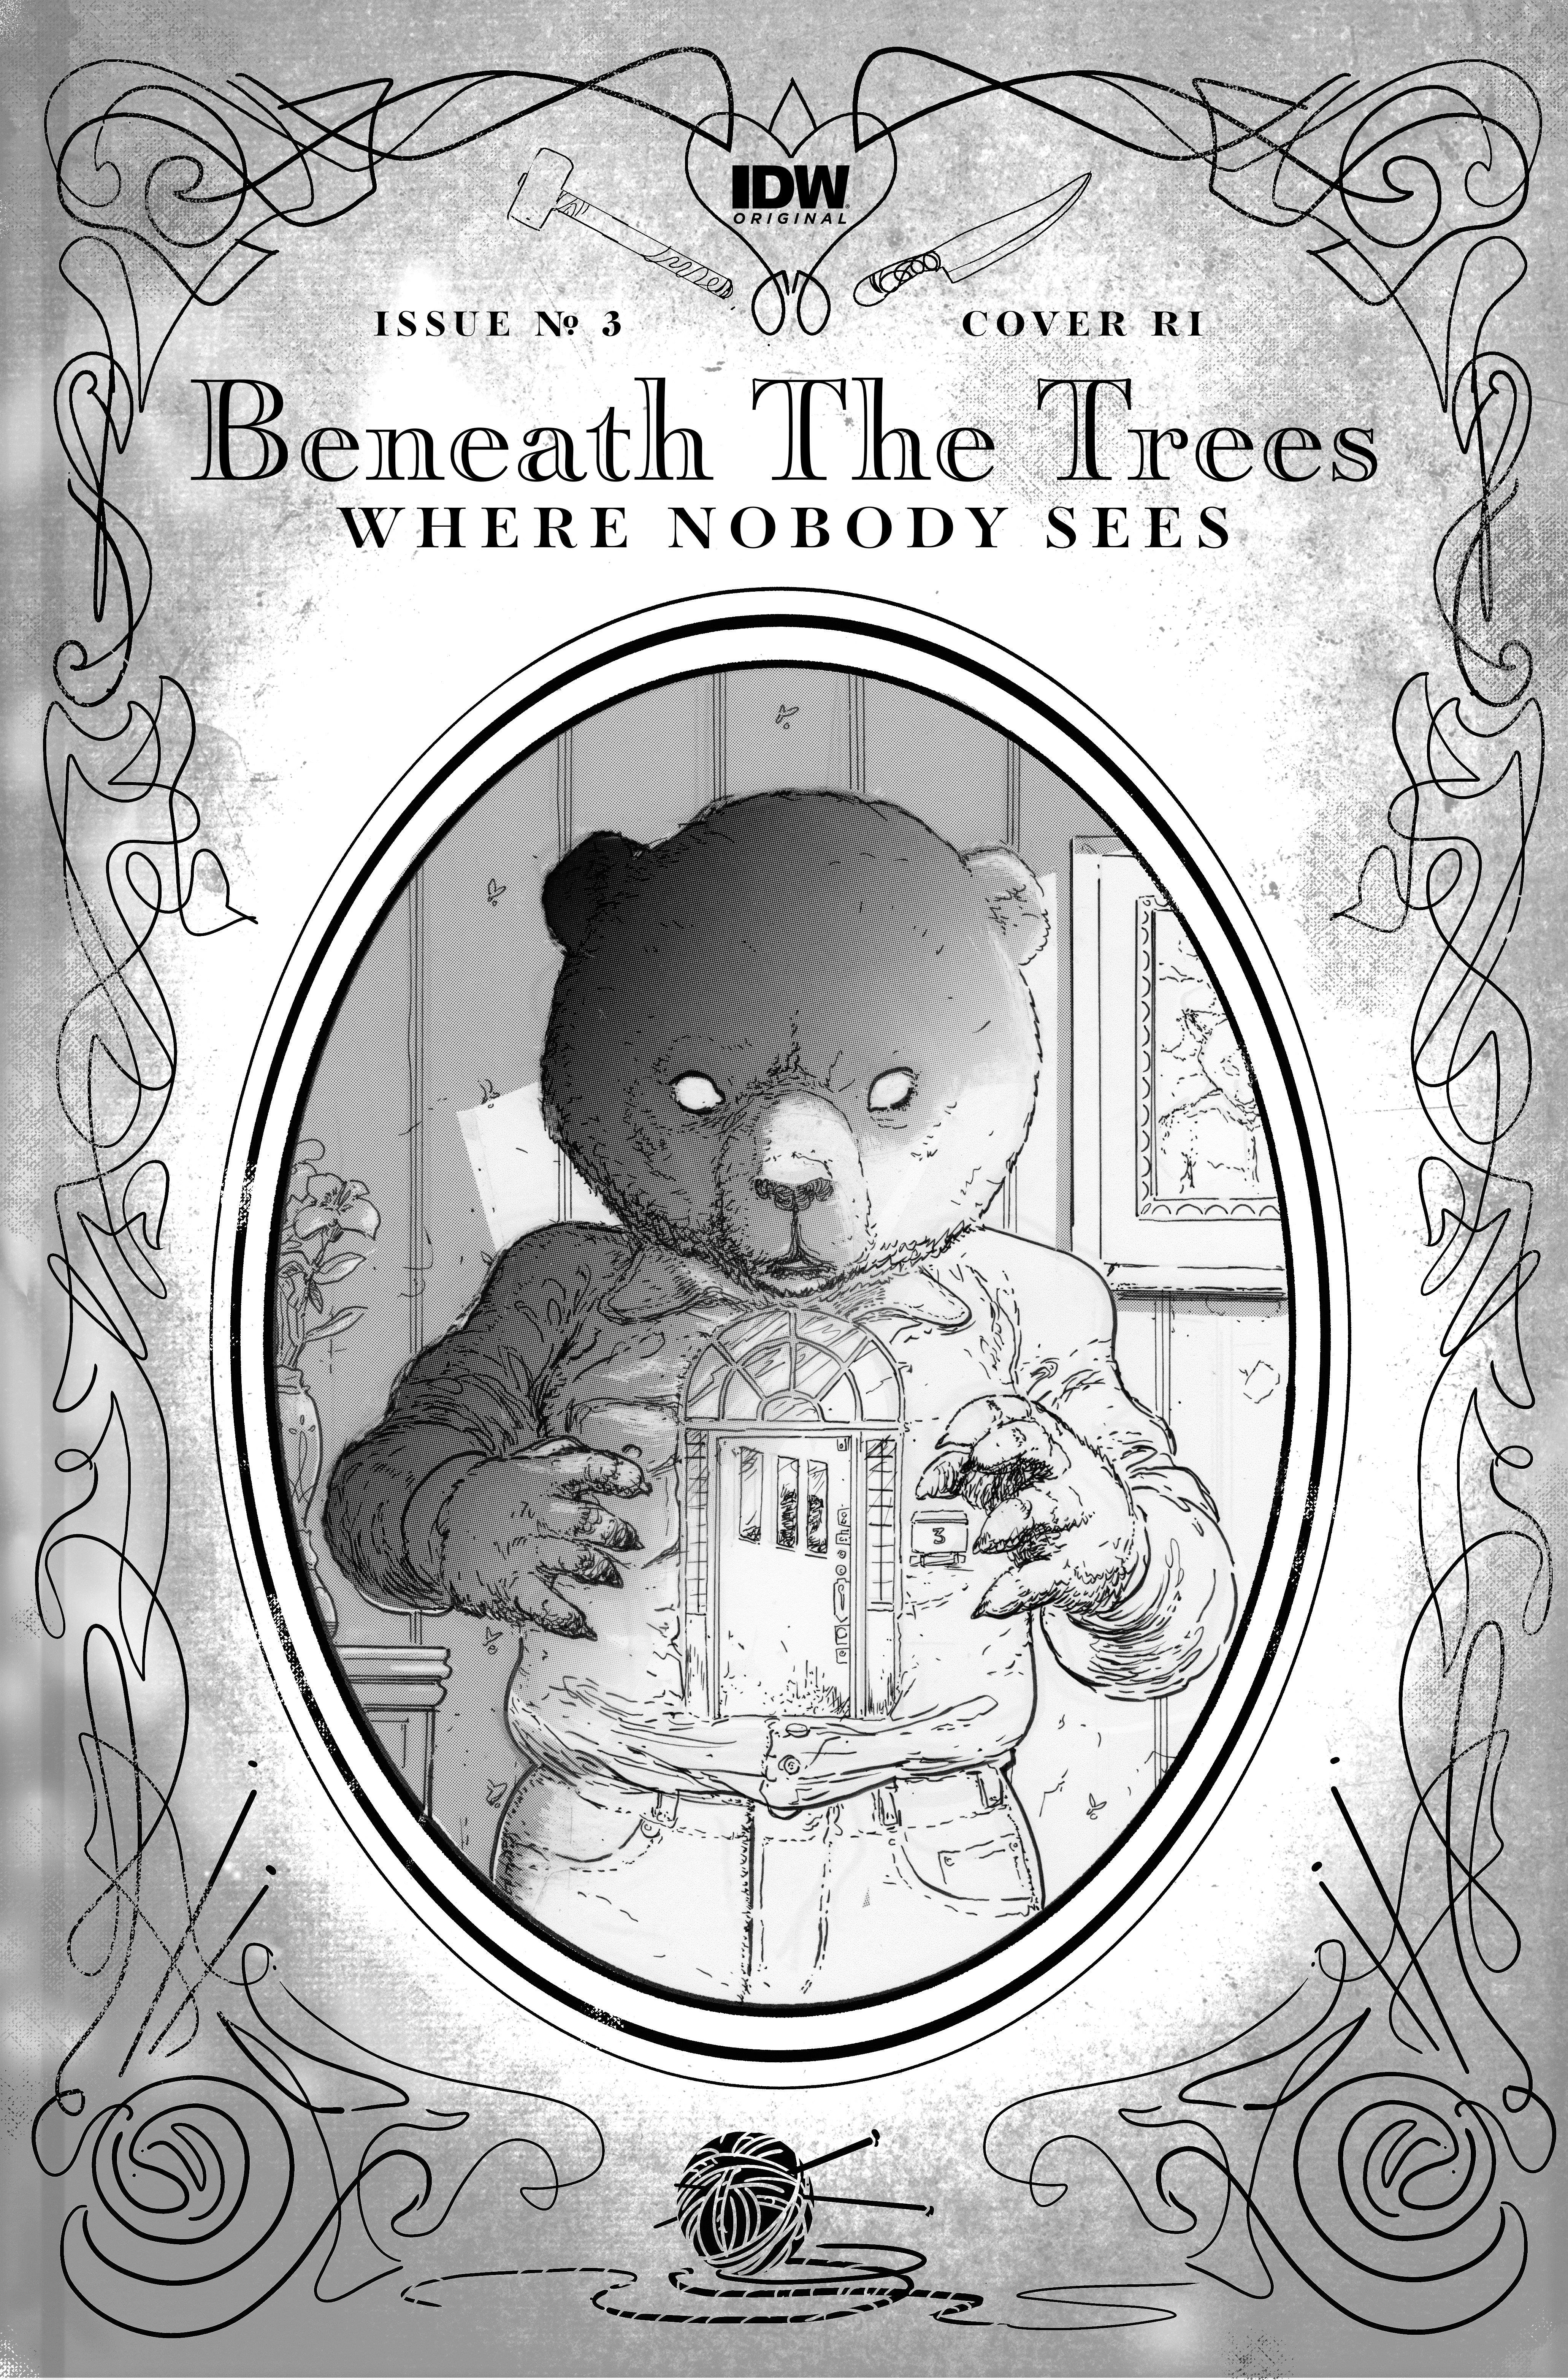 Beneath the Trees Where Nobody Sees #3 Cover Rossmo Storybook Cover B&W 1 for 25 Incentive